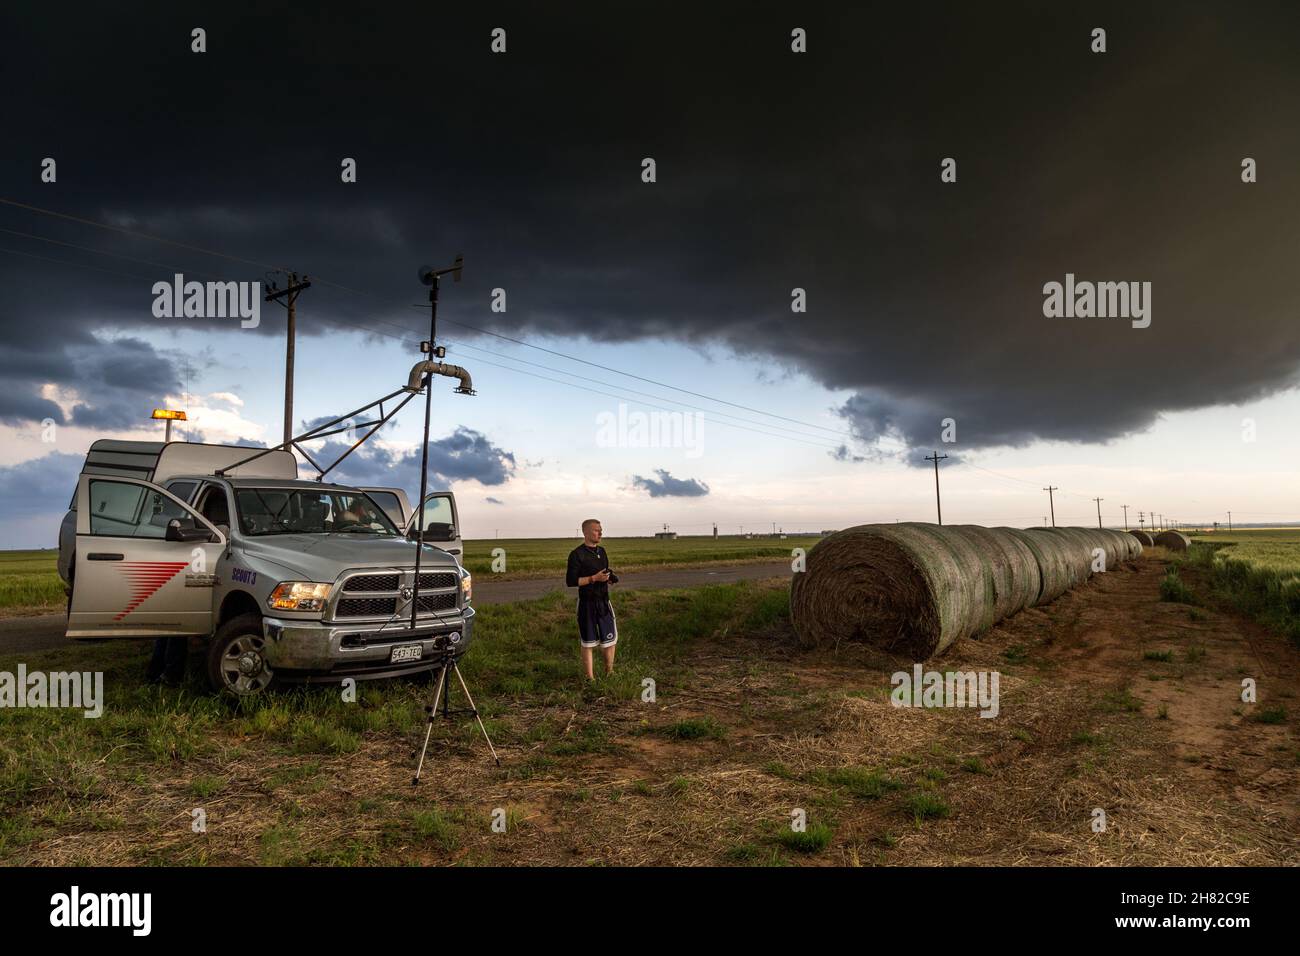 A researcher with Project Vortex gathers weather data while parked under a storm in Oklahoma, May 8, 2016. Stock Photo